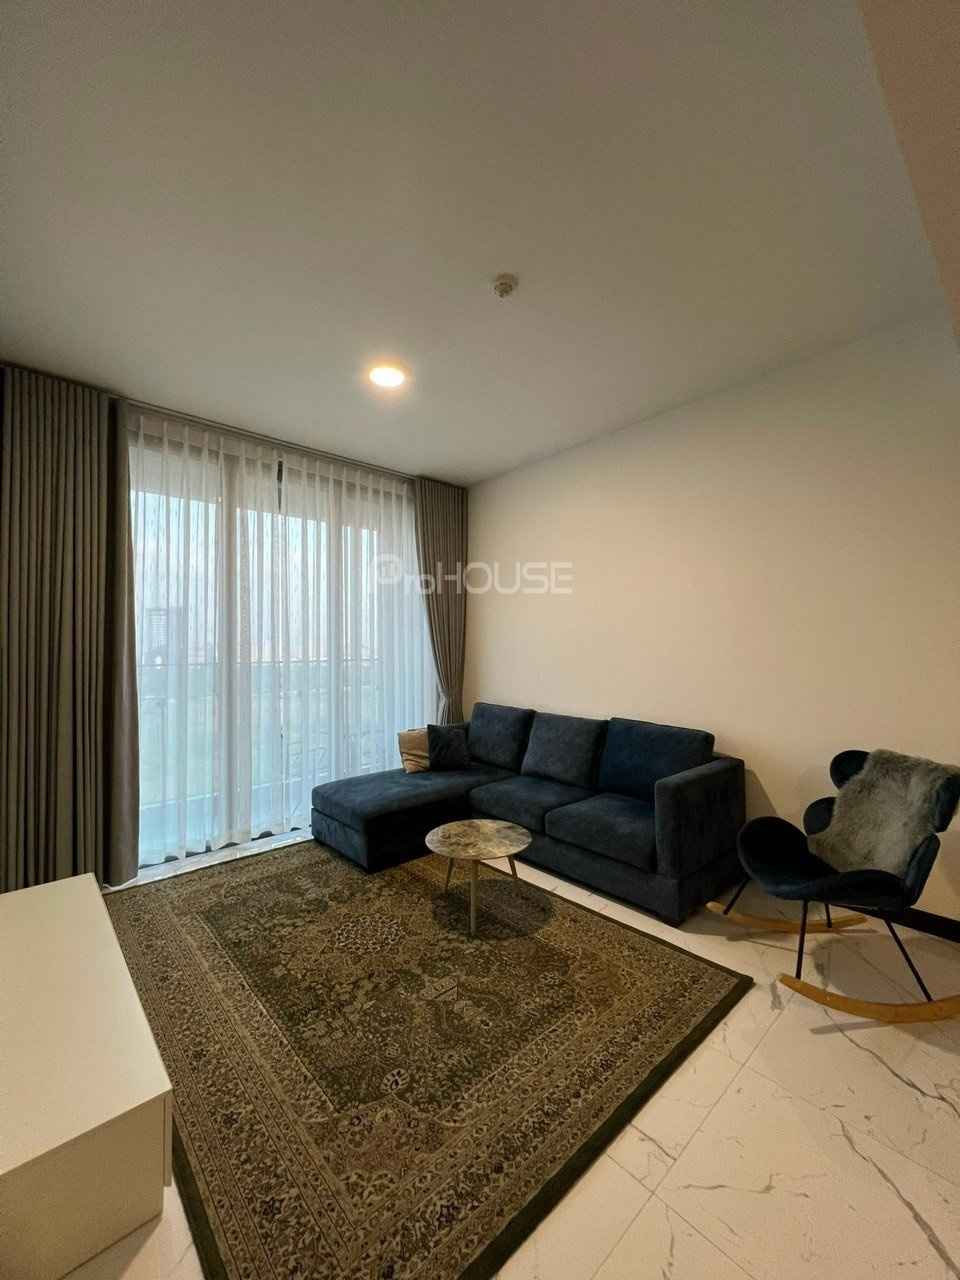 2 bedroom apartment for rent in Empire City with full furniture and open view 